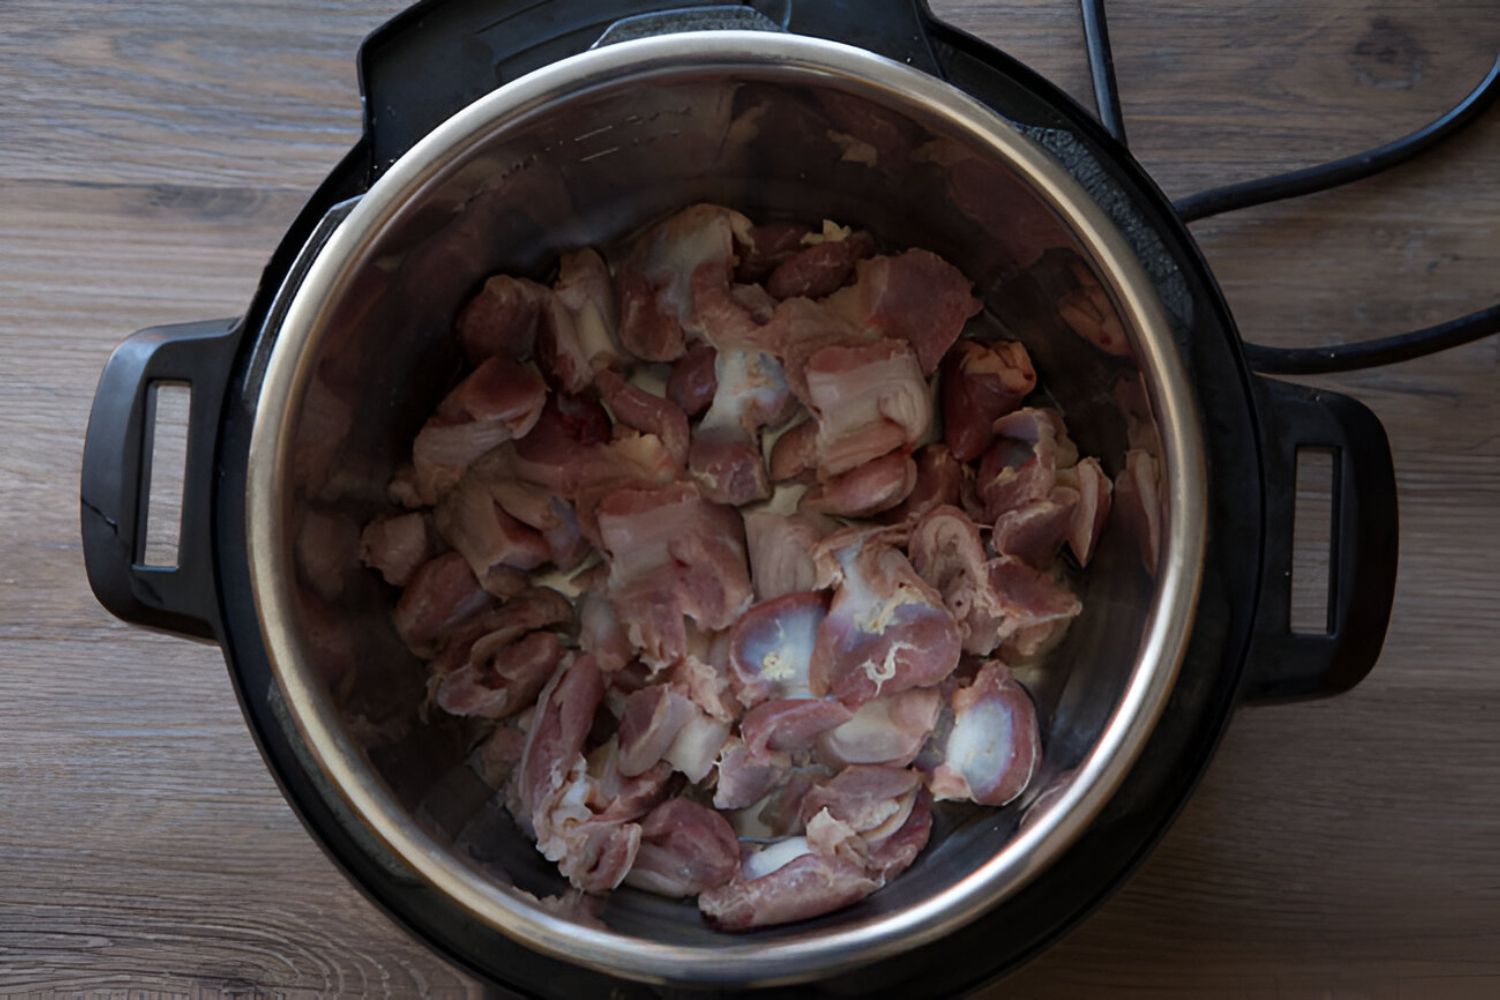 How To Cook Chicken Gizzards In An Electric Pressure Cooker